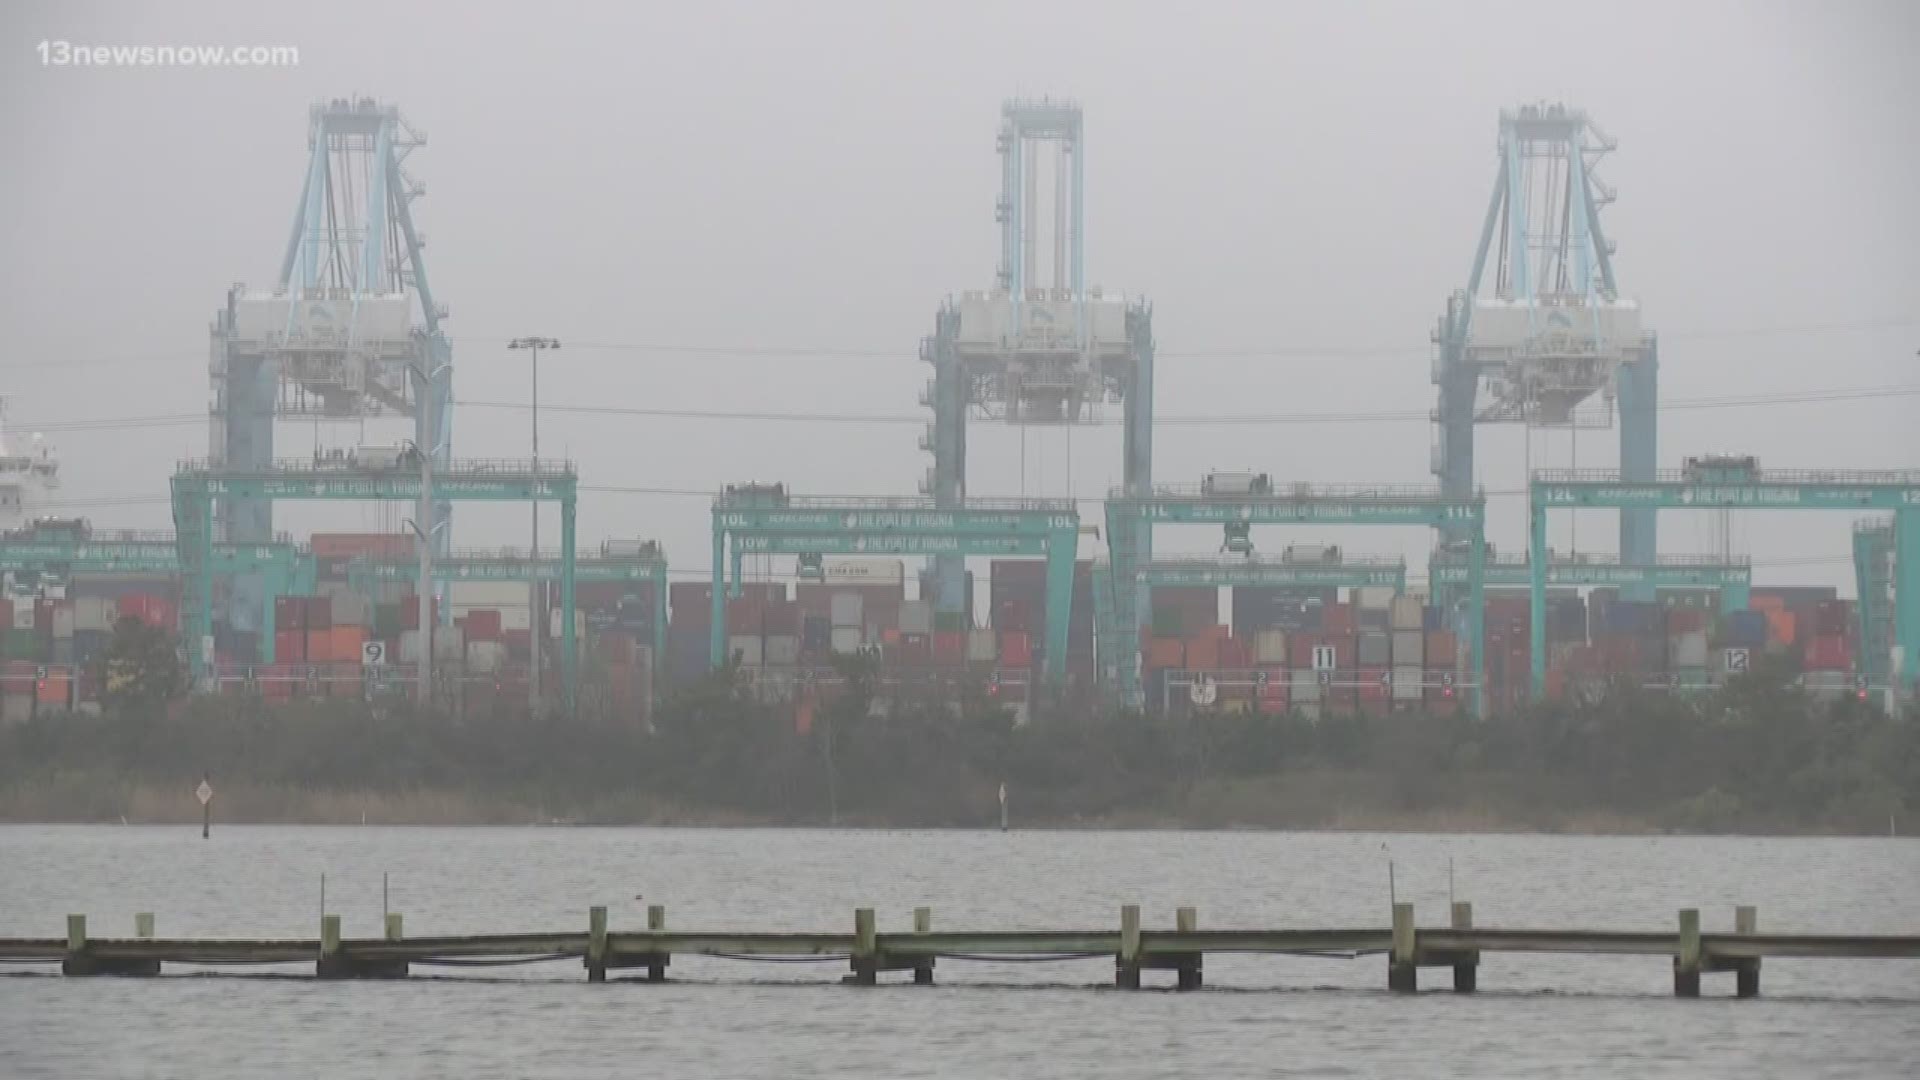 The Port of Virginia is expecting a drop of 44,000 import containers due to the coronavirus. Some ships are idle throughout parts of the Commonwealth.